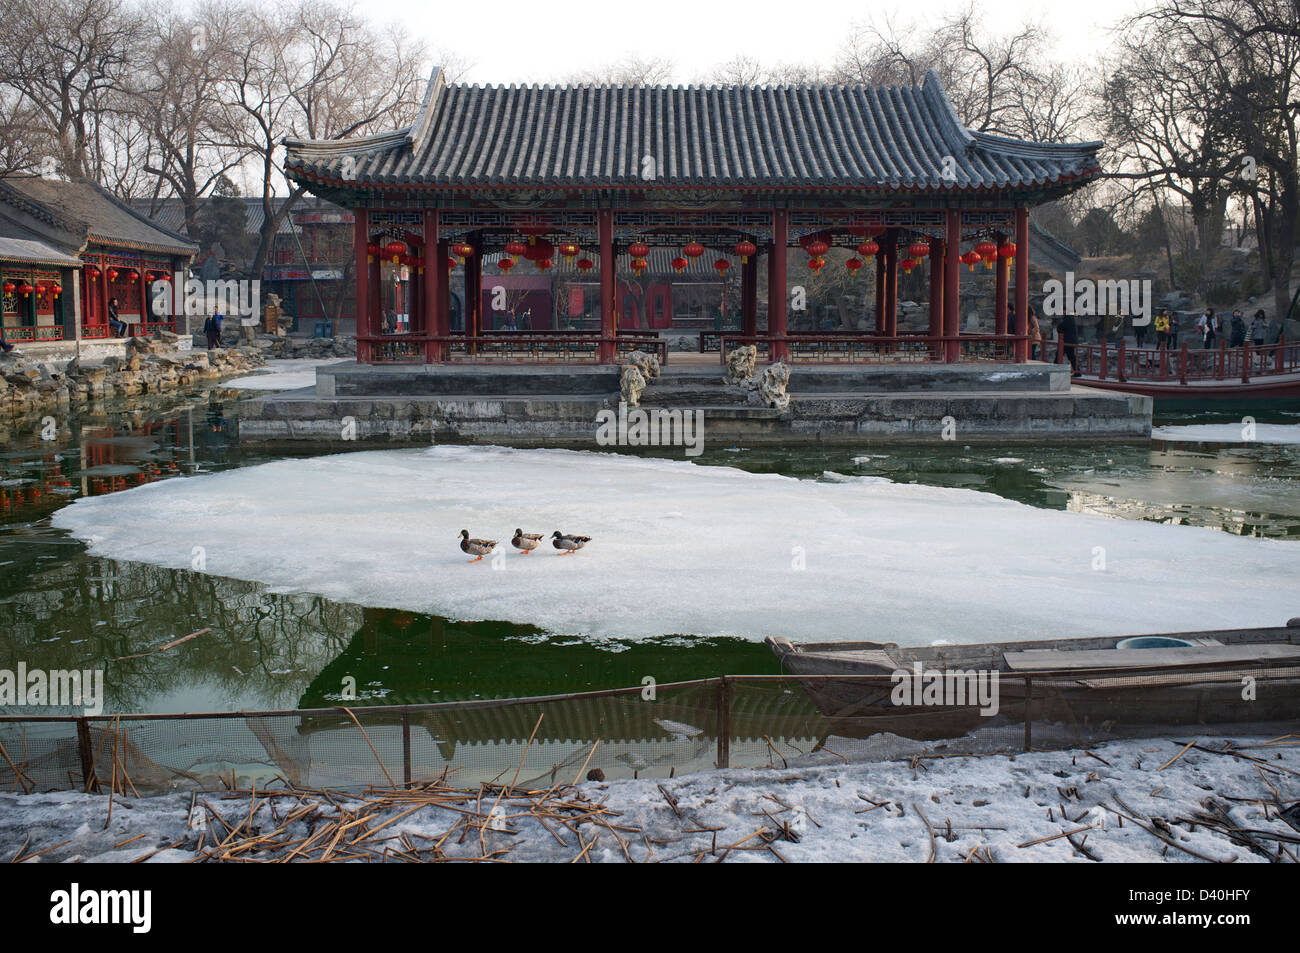 The Prince Gong's Mansion in Beijing, China. 23-Feb-2013 Stock Photo